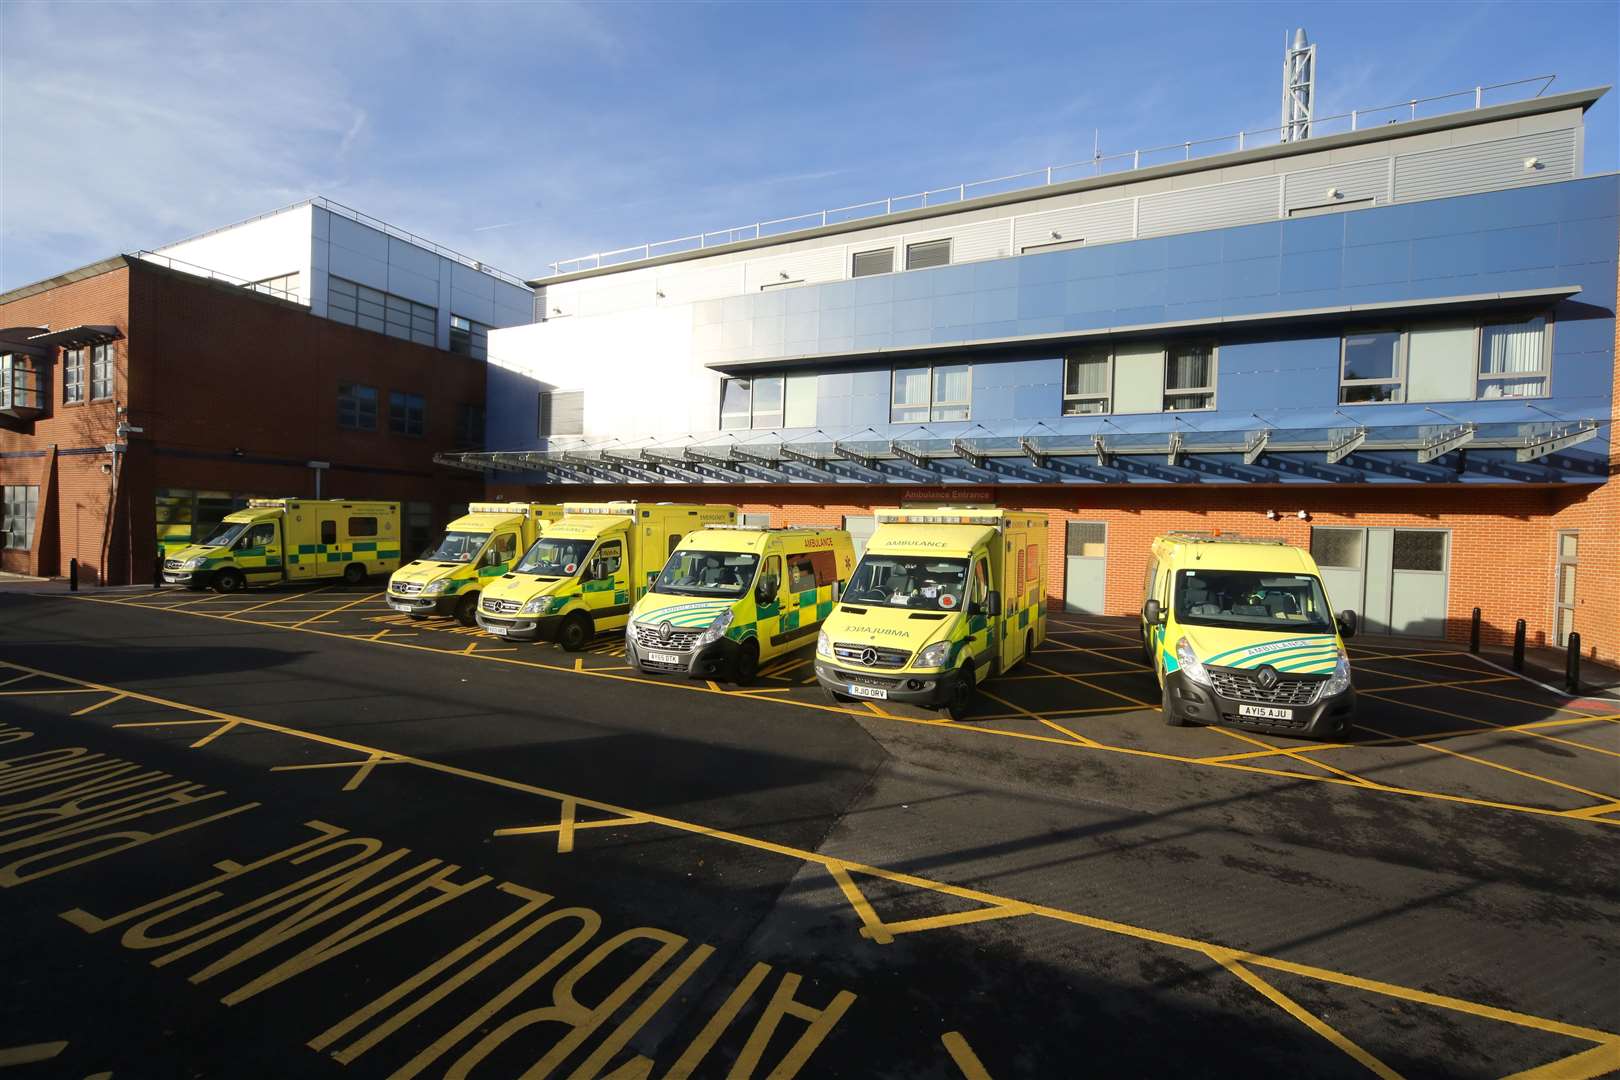 Ambulance arrivals at hospitals across Kent have increased in a week to 3,354 on January 23